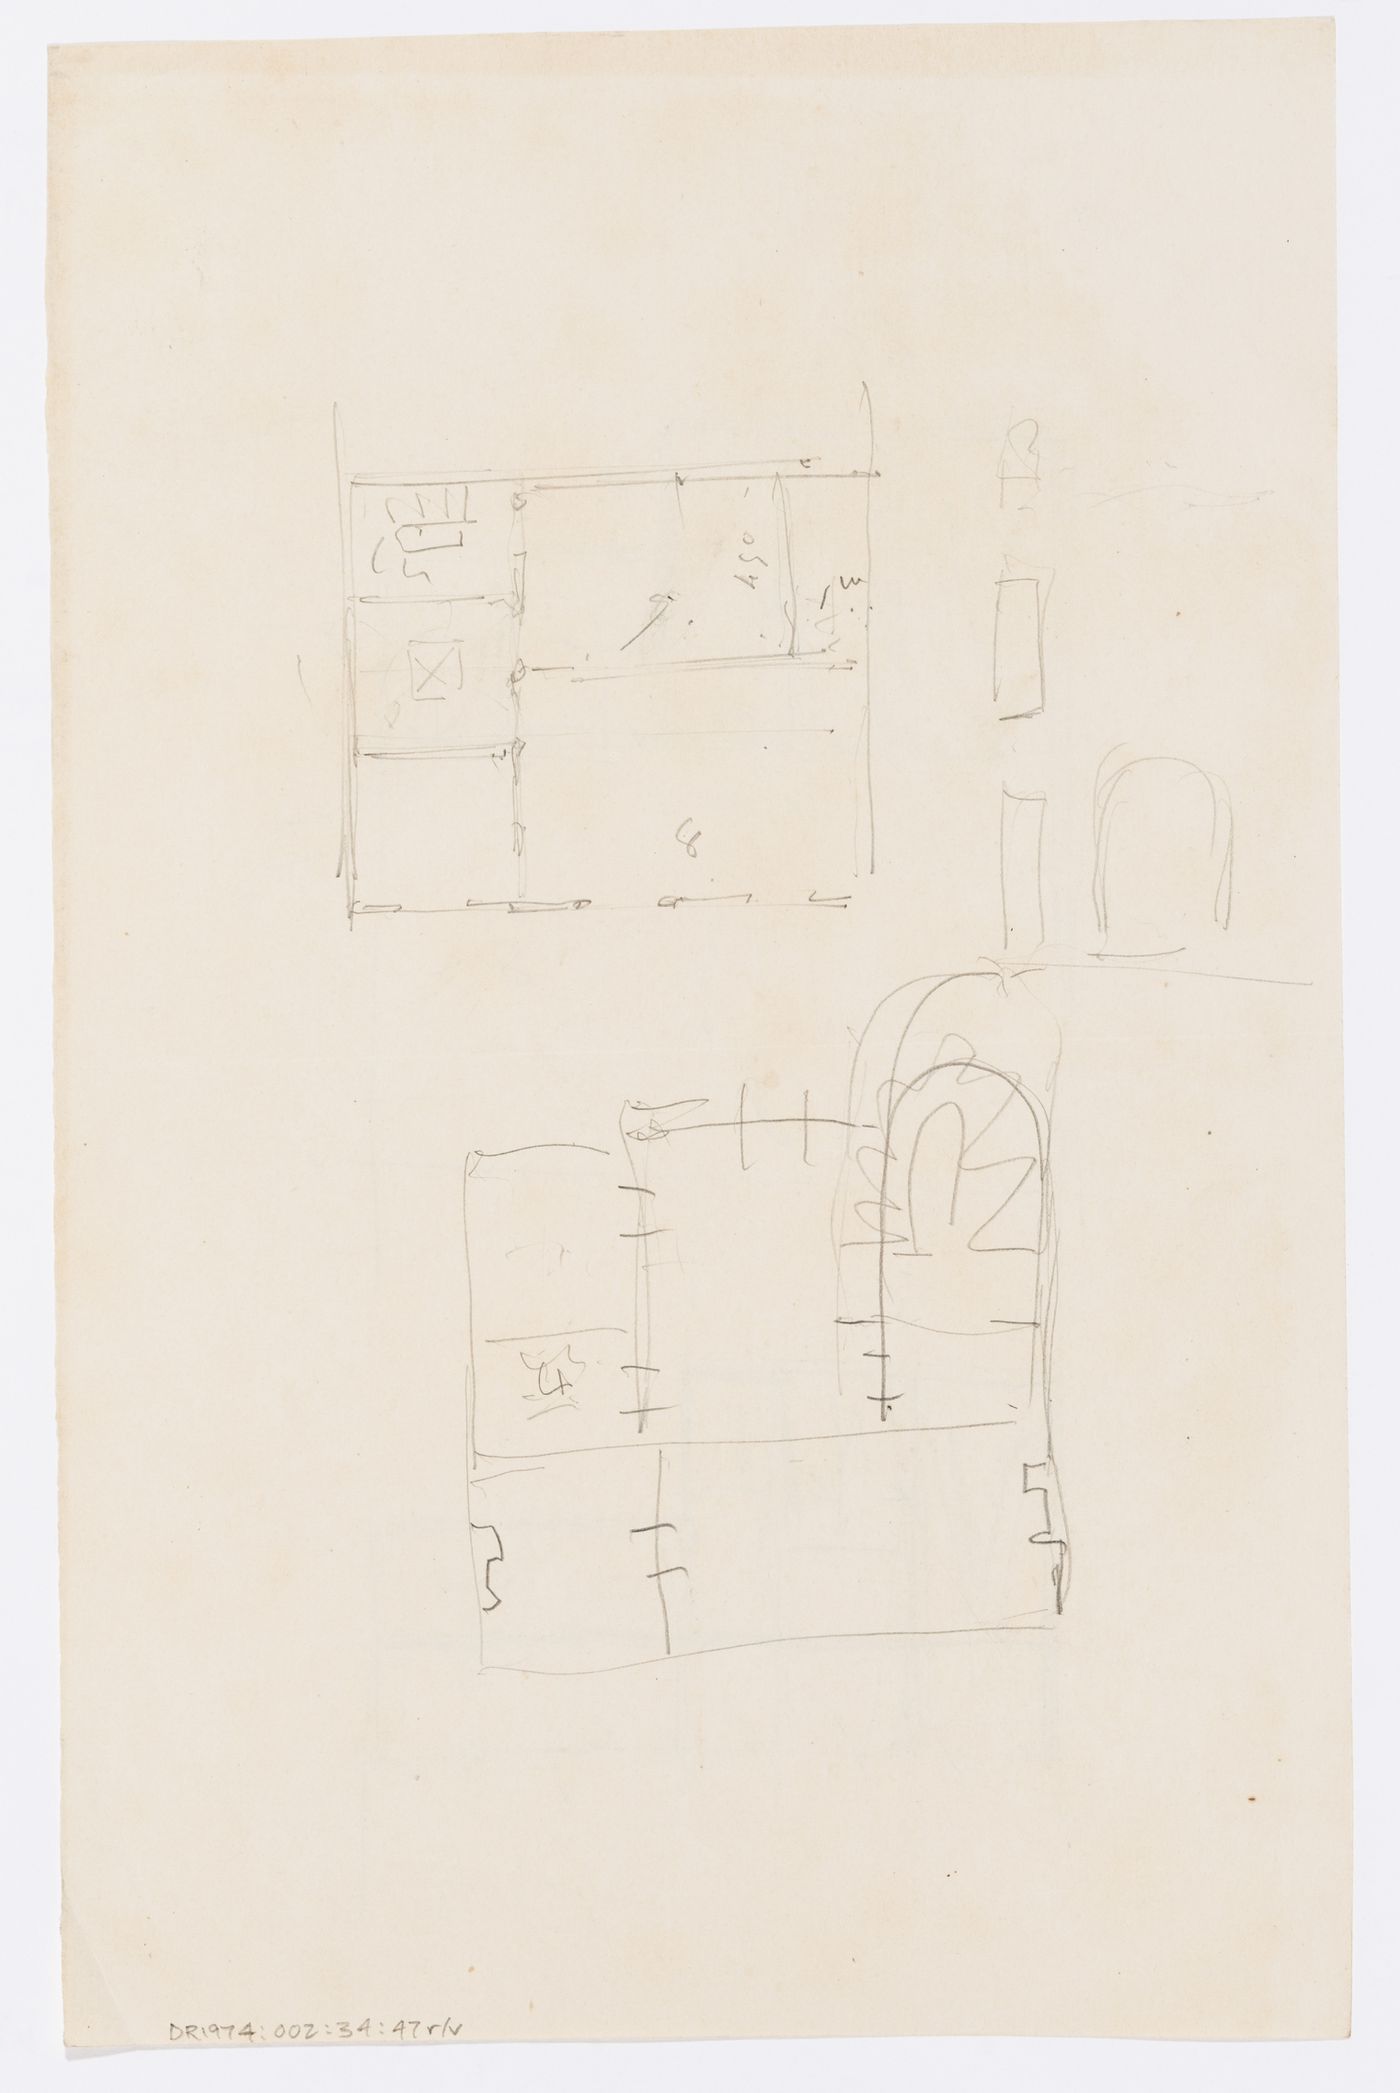 Project for a country house for comte Treilhard: Unidentified sketch plans; verso: Project for a country house for comte Treilhard: Unidentified sketch plans